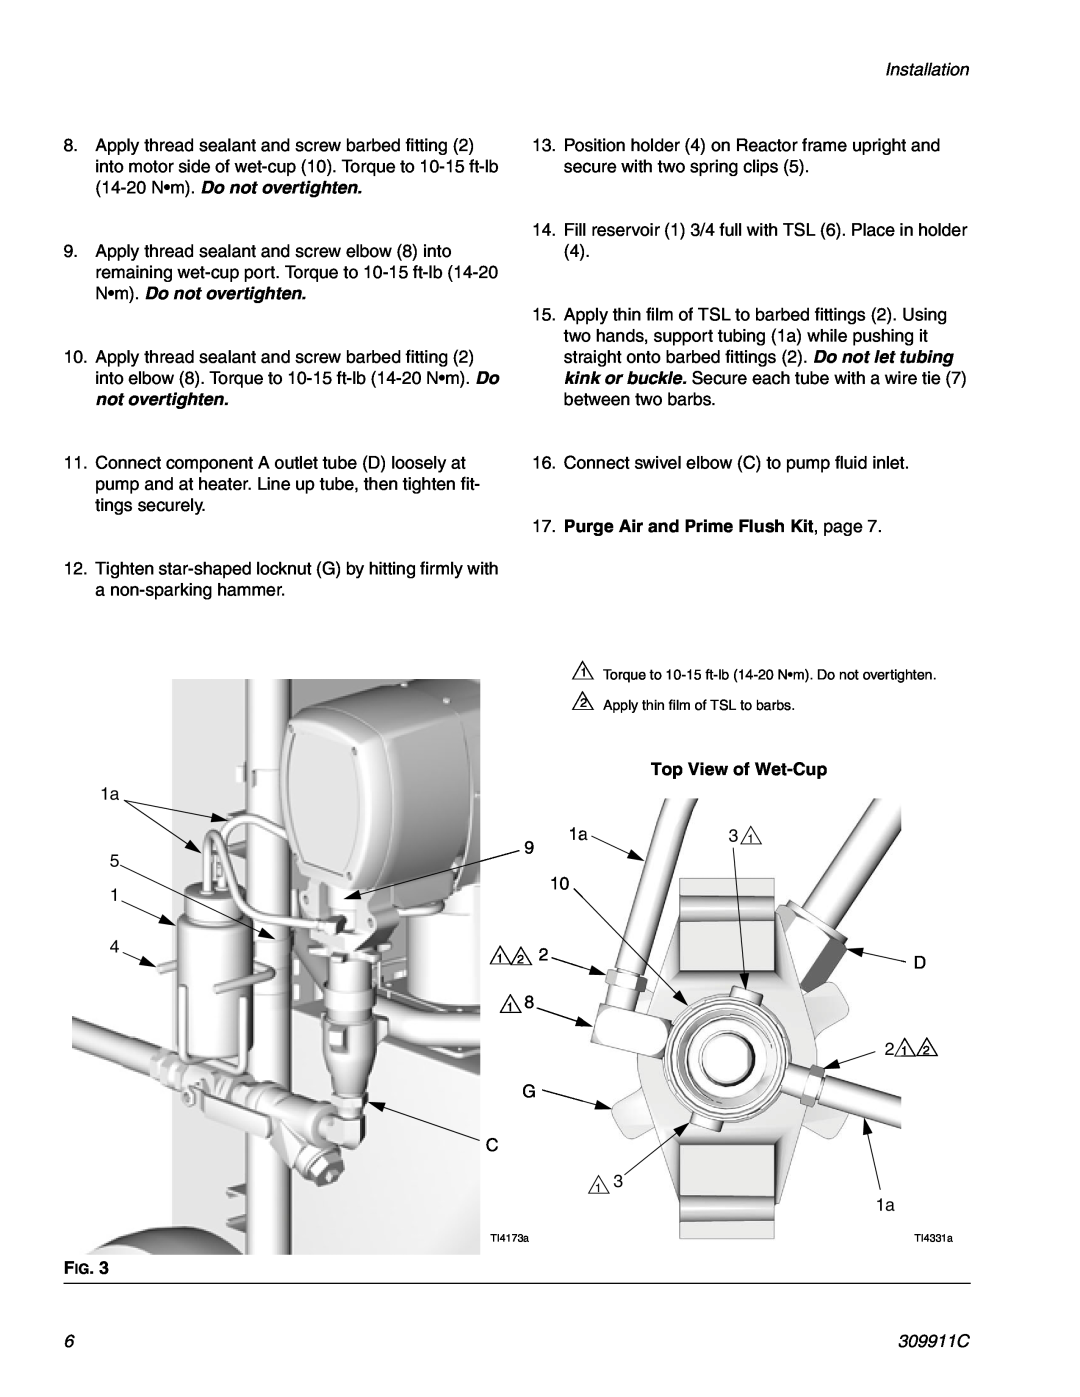 Graco 309911C manual Installation, Purge Air and Prime Flush Kit, page 